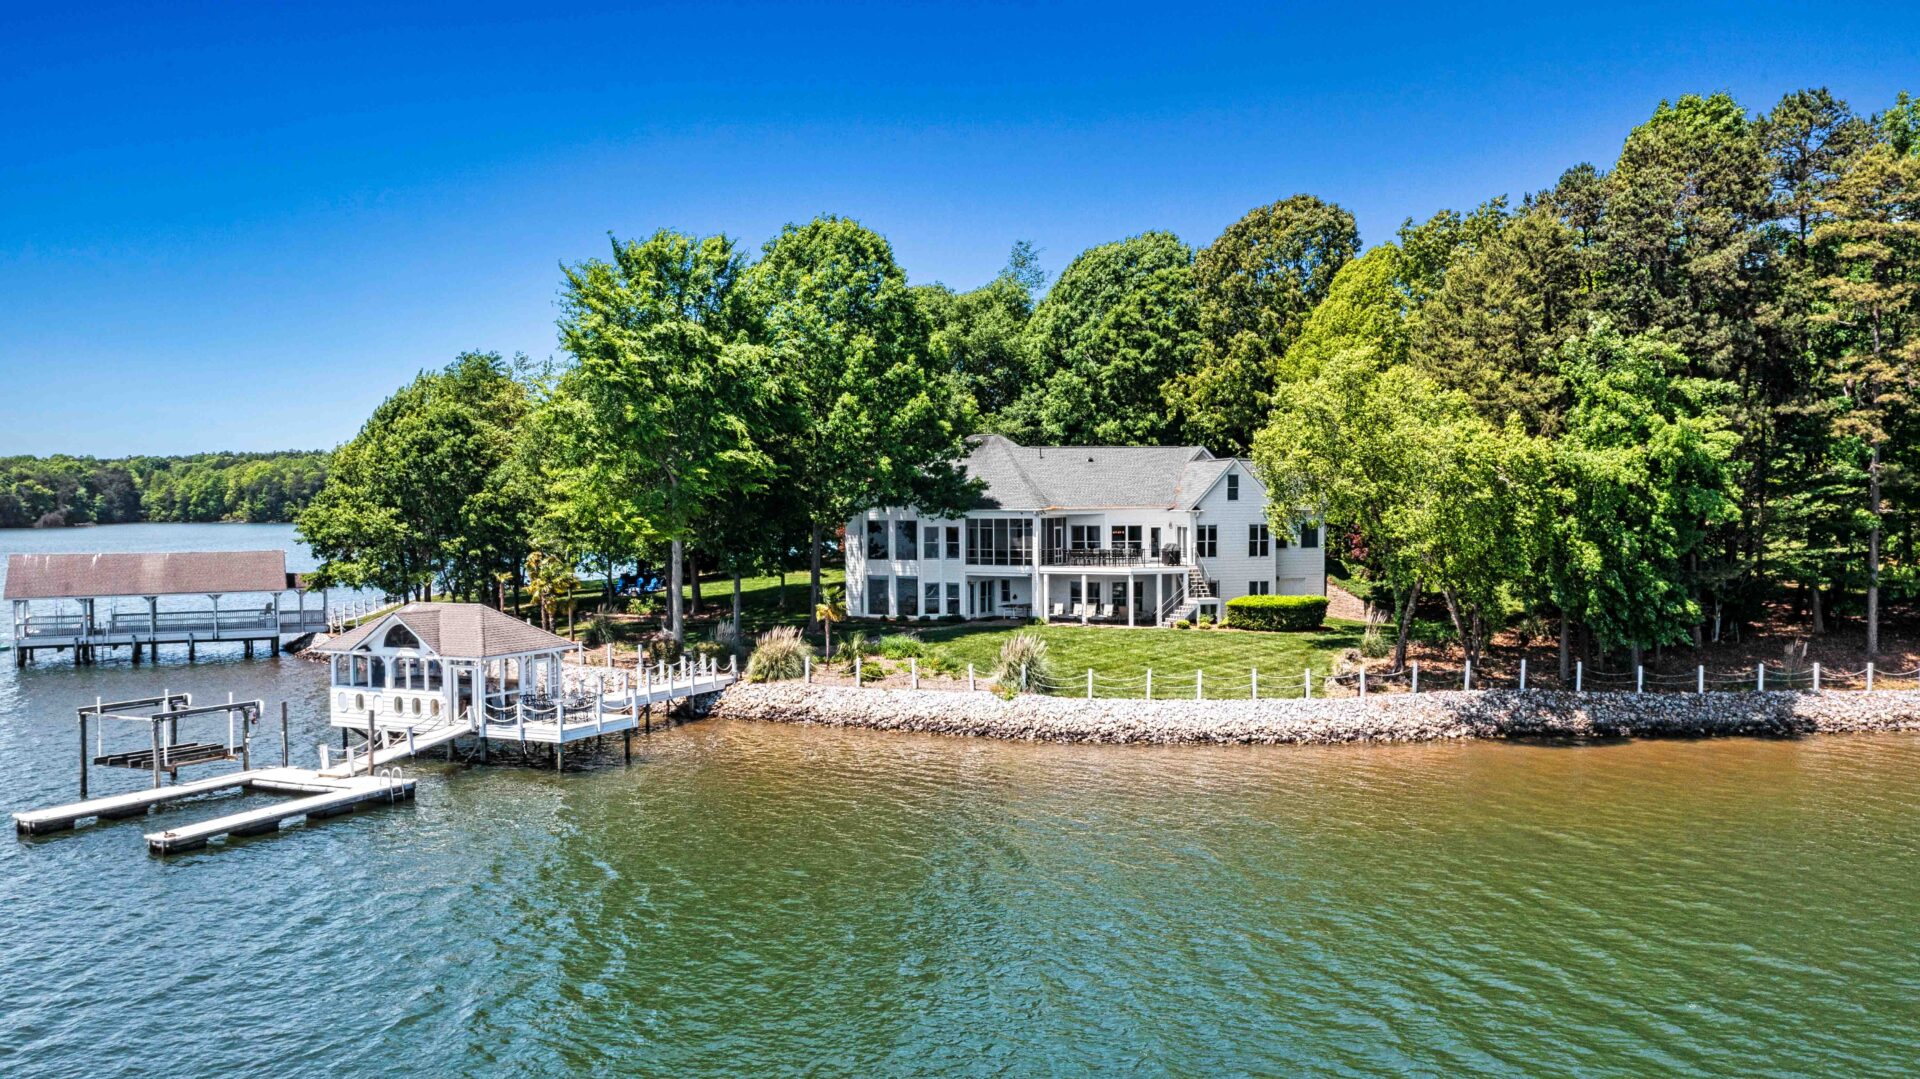 A large house on the water with trees in front of it.